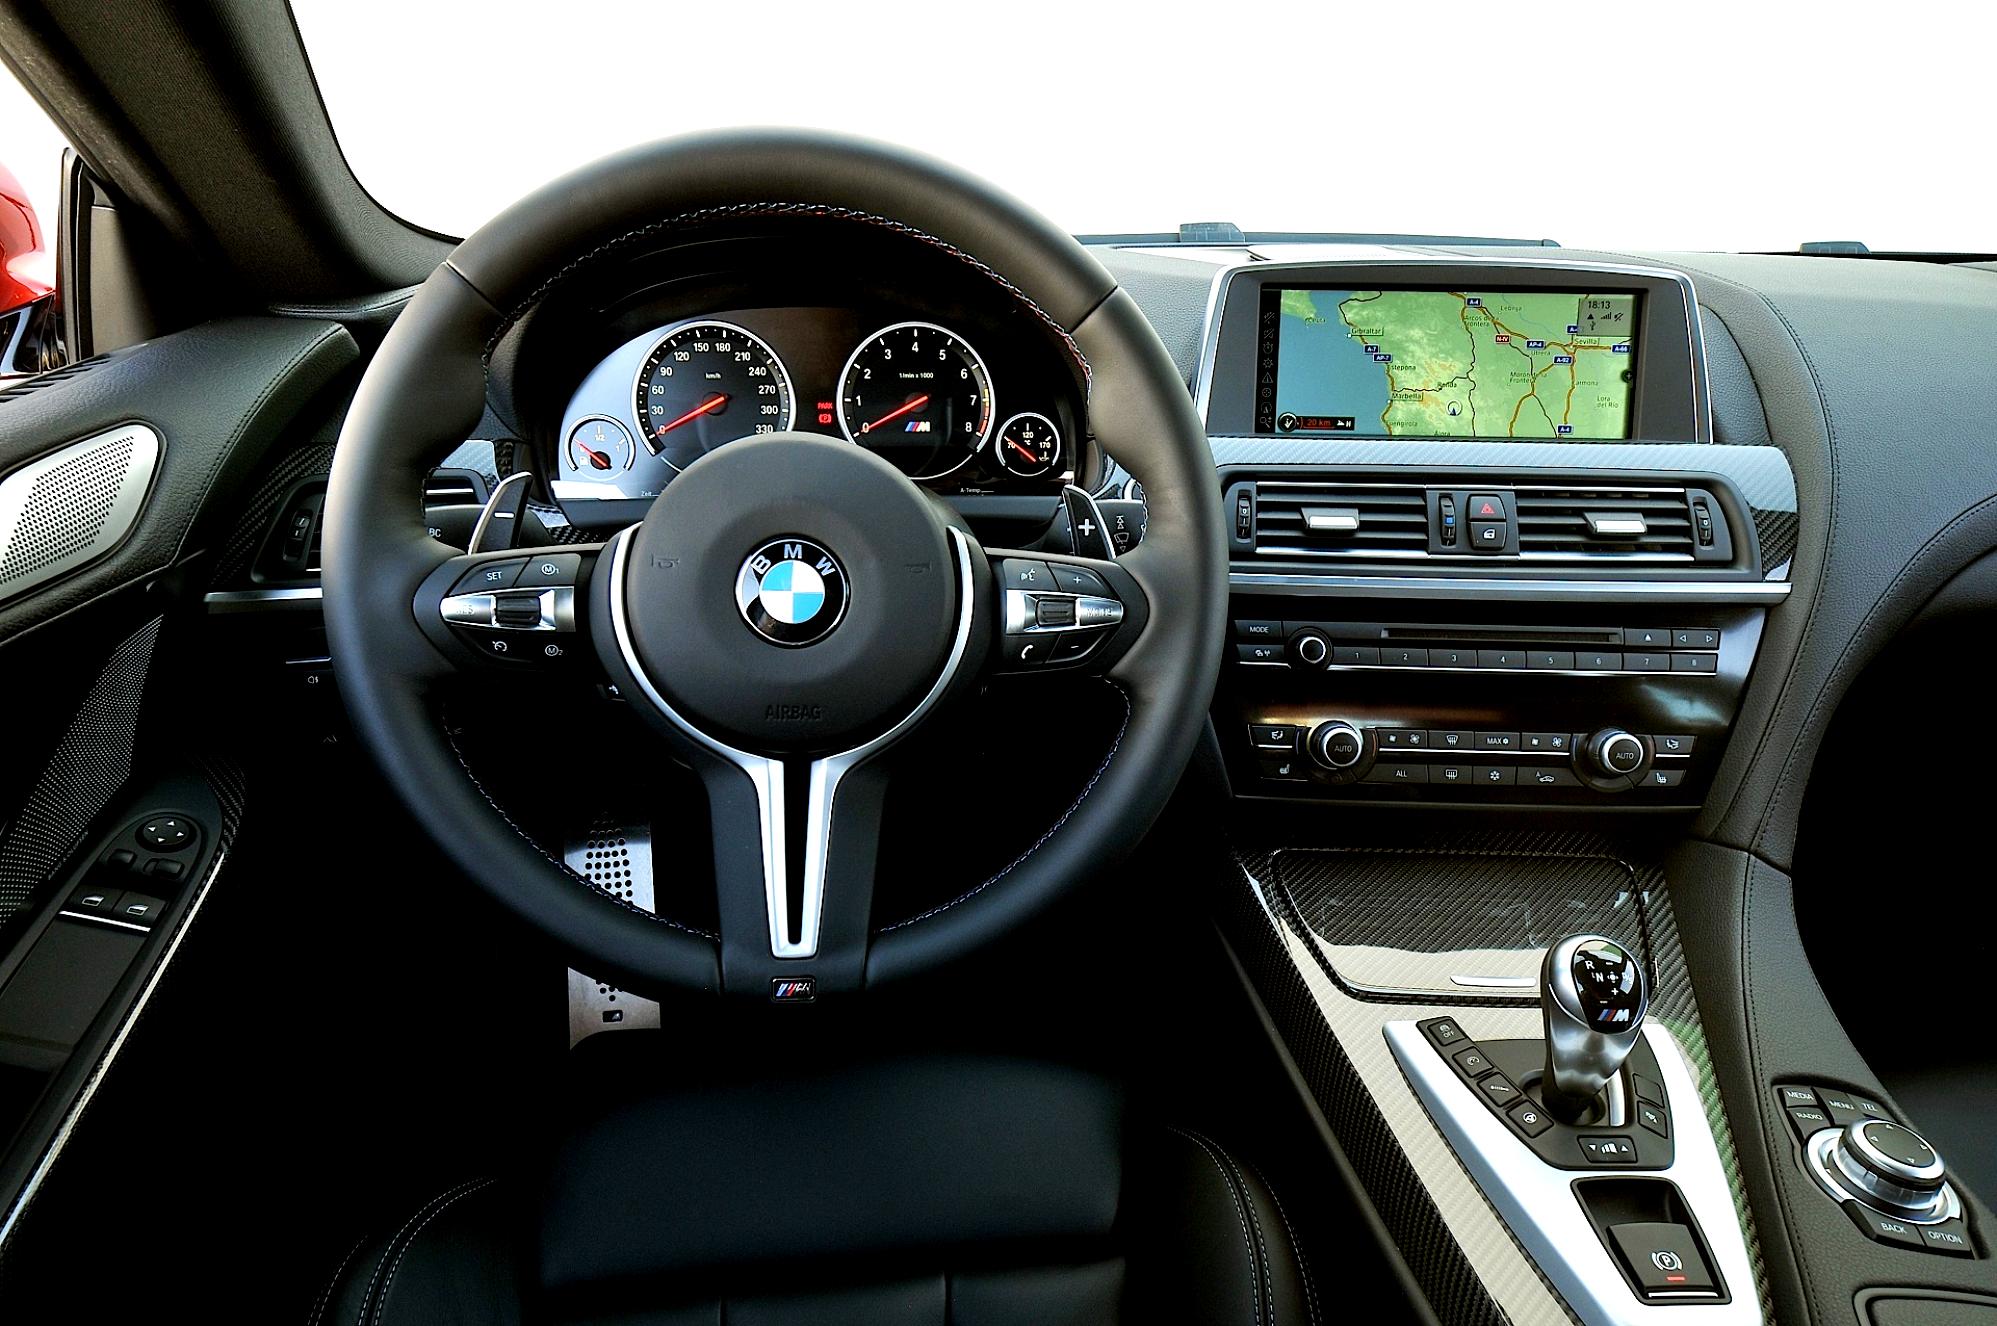 BMW M6 Coupe F13 2012 #126